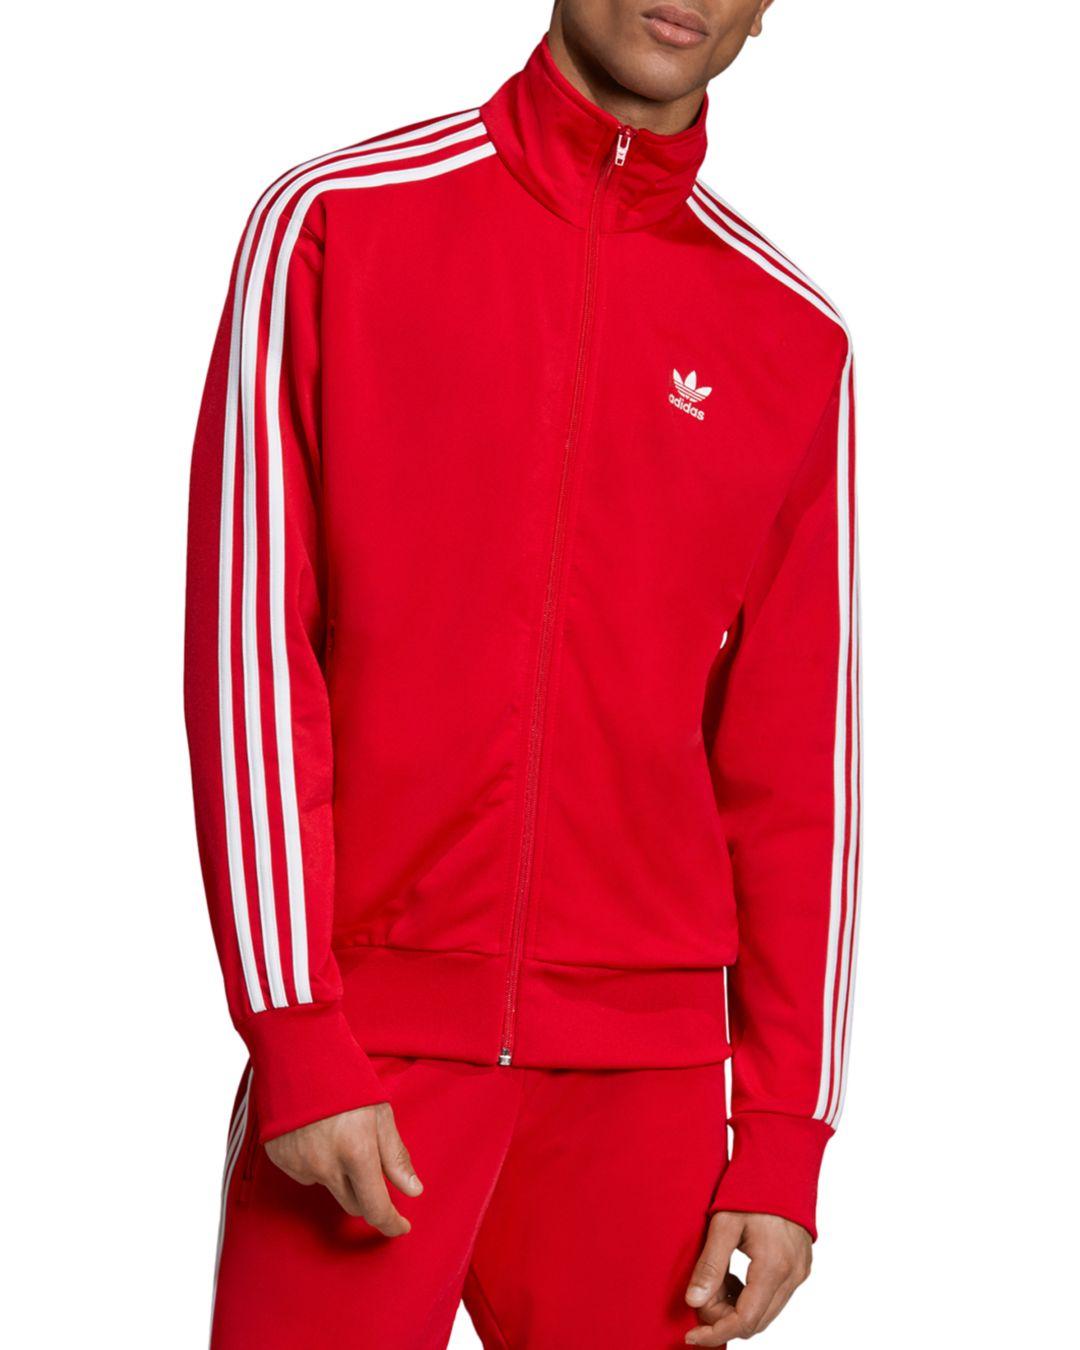 adidas Originals Tricot Track Jacket in for | Lyst